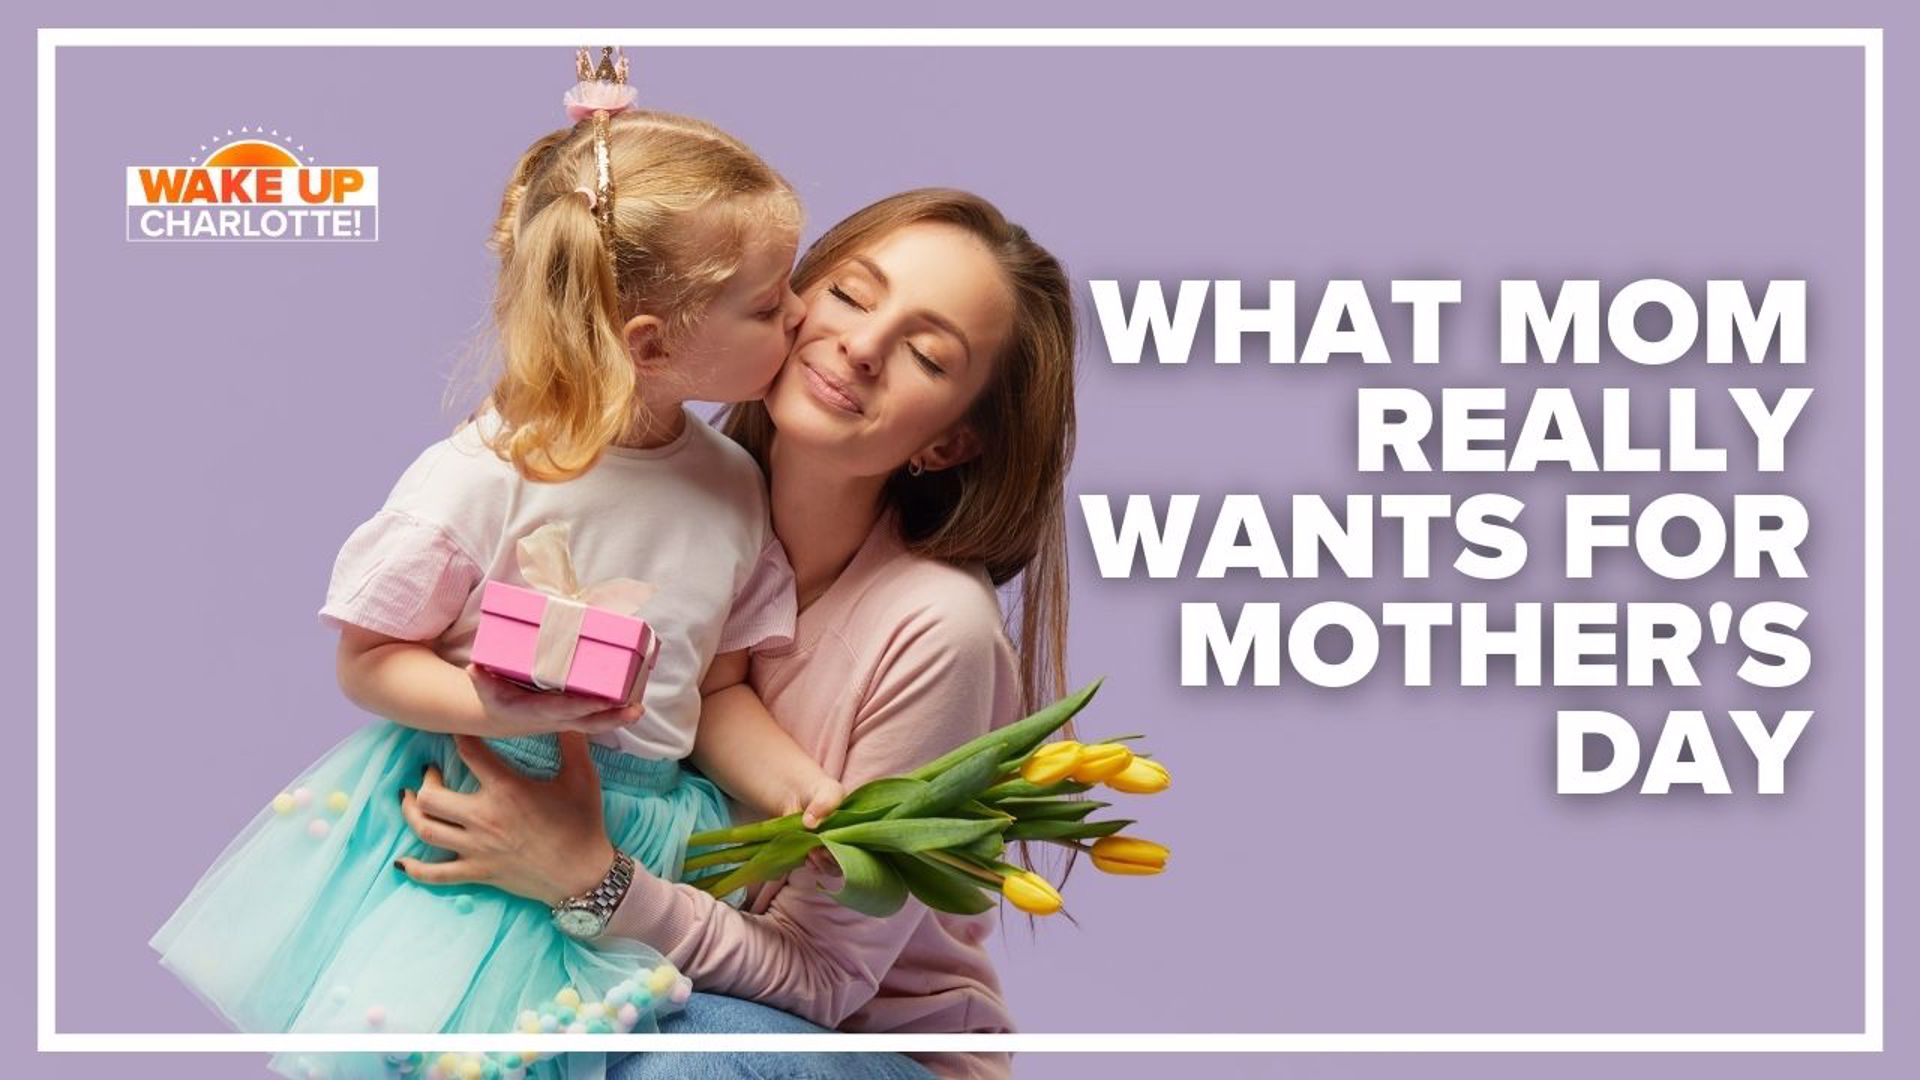 A new survey revealed what moms across the U.S. really want for Mother's Day. In most states, all they want is a nap! But in the Carolinas, a nice meal is best.